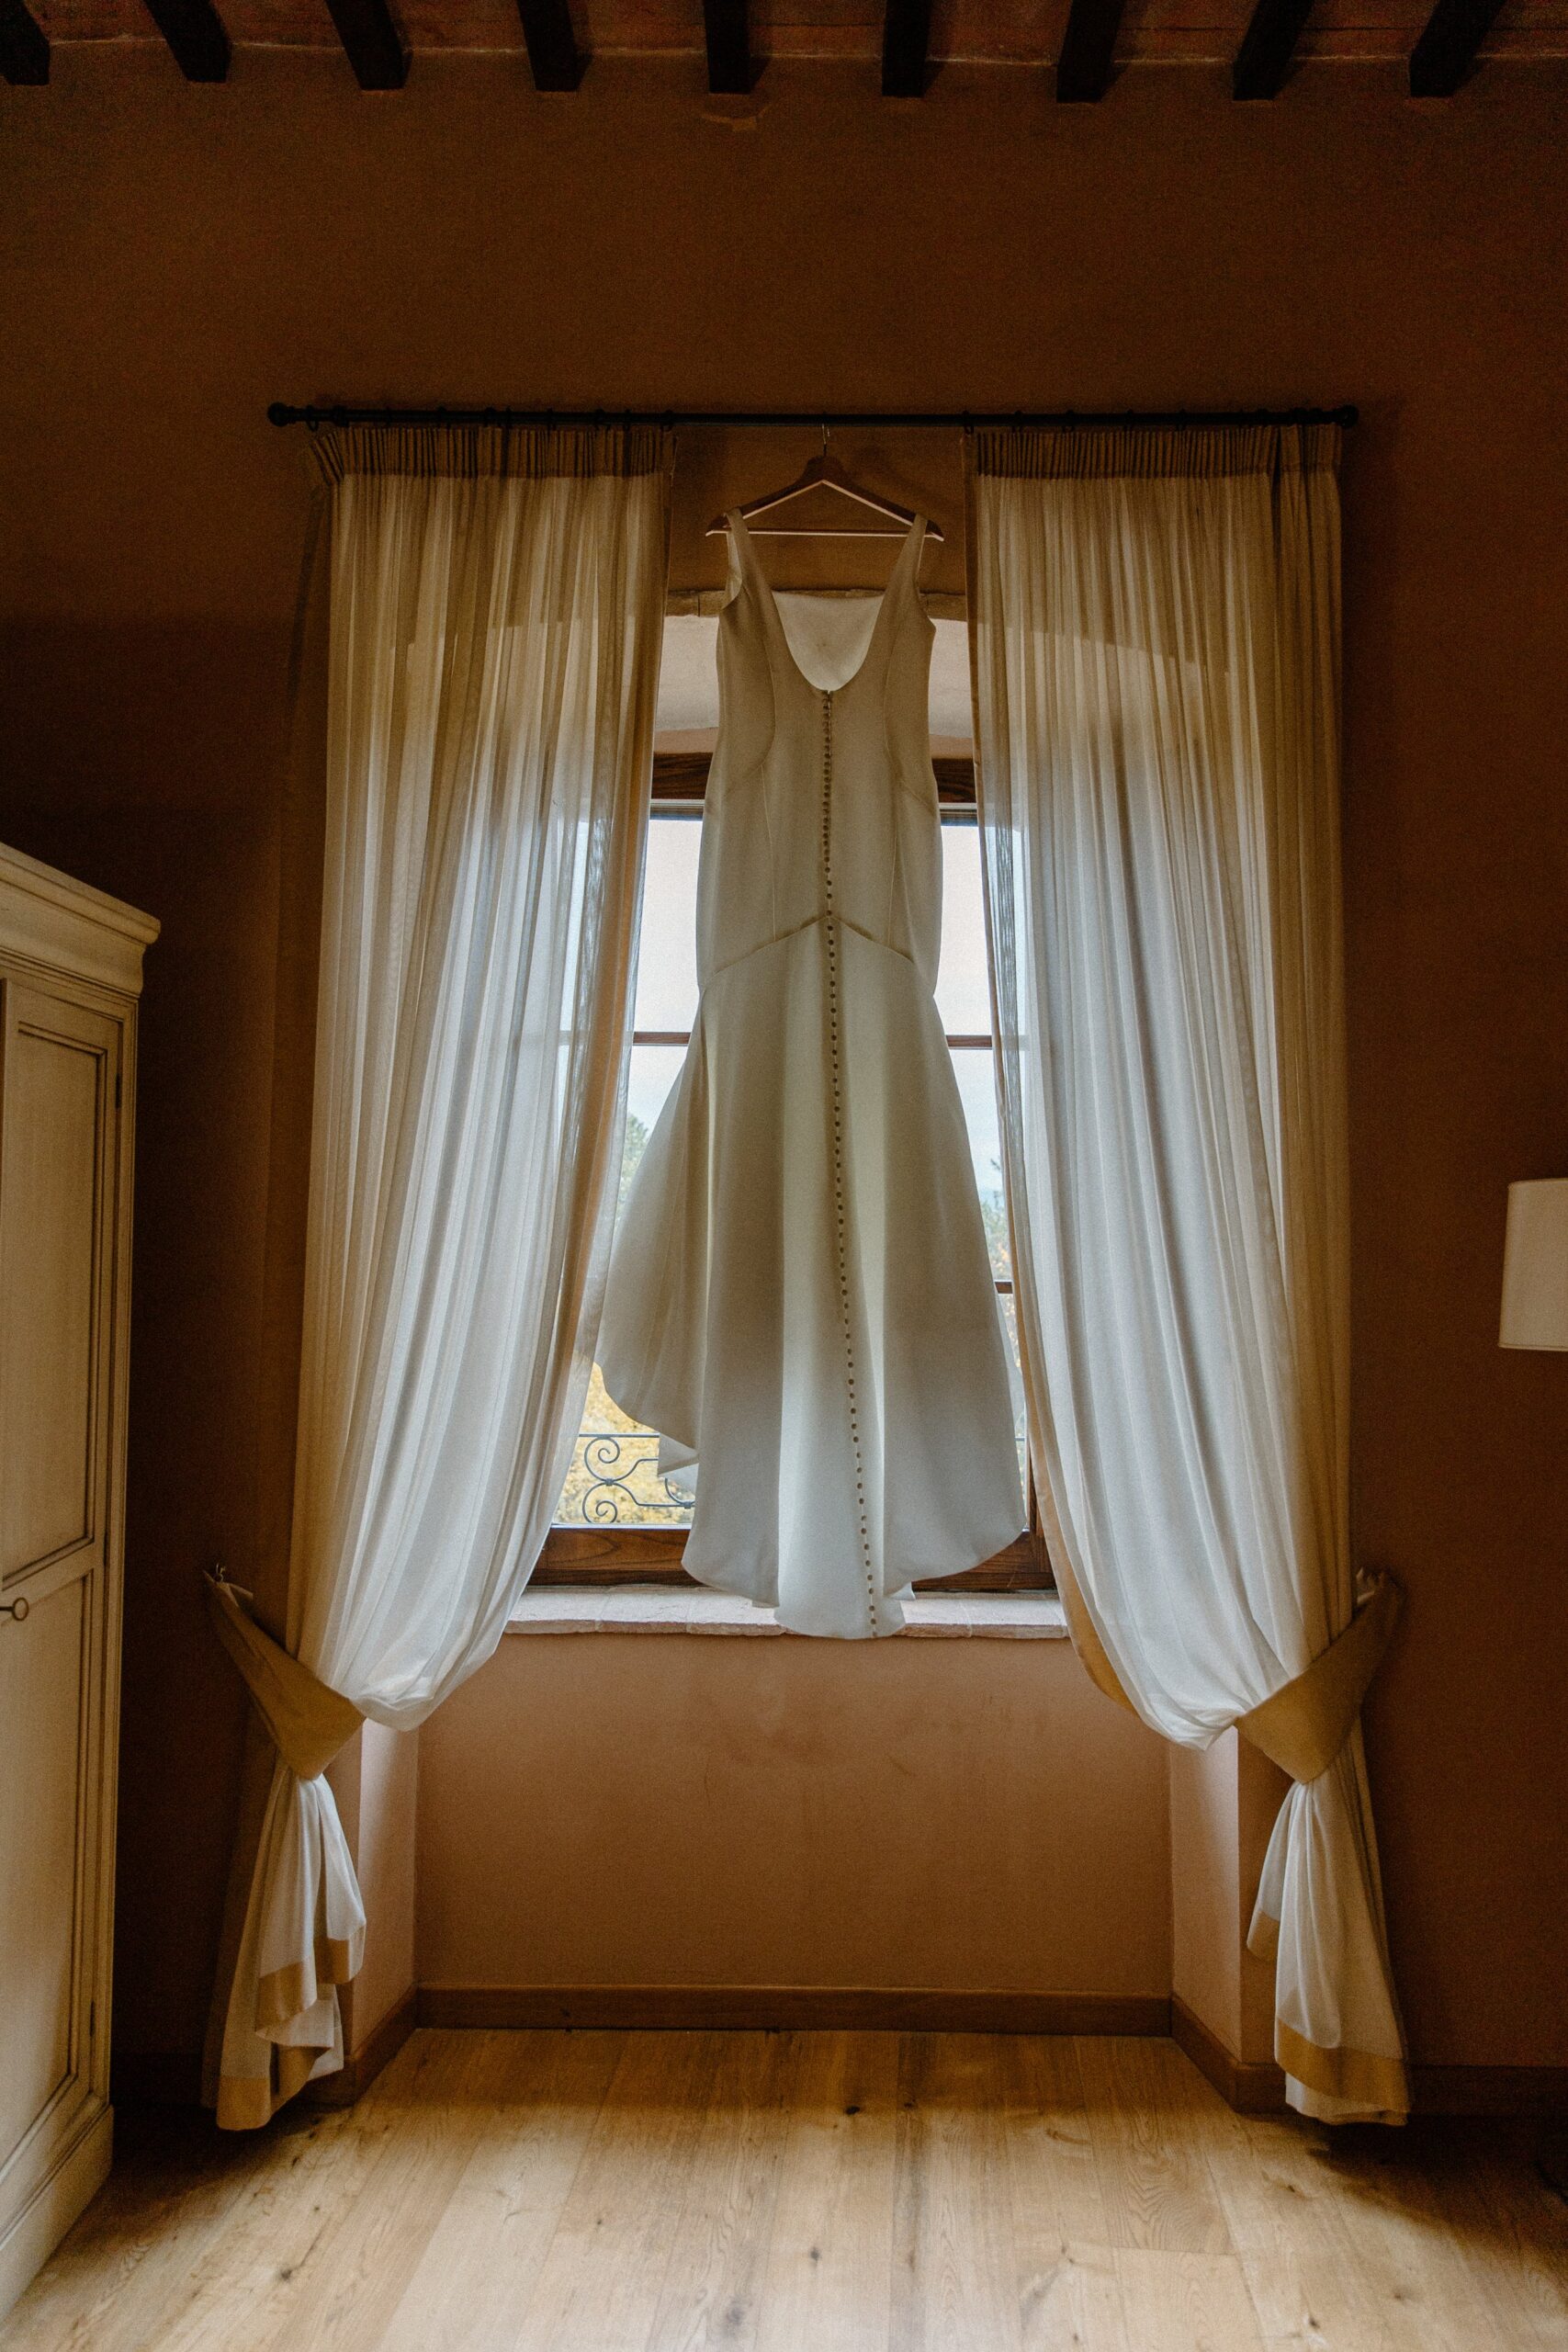 Elopement Dress hanging in the window at Castello di Baccaresca in Italy